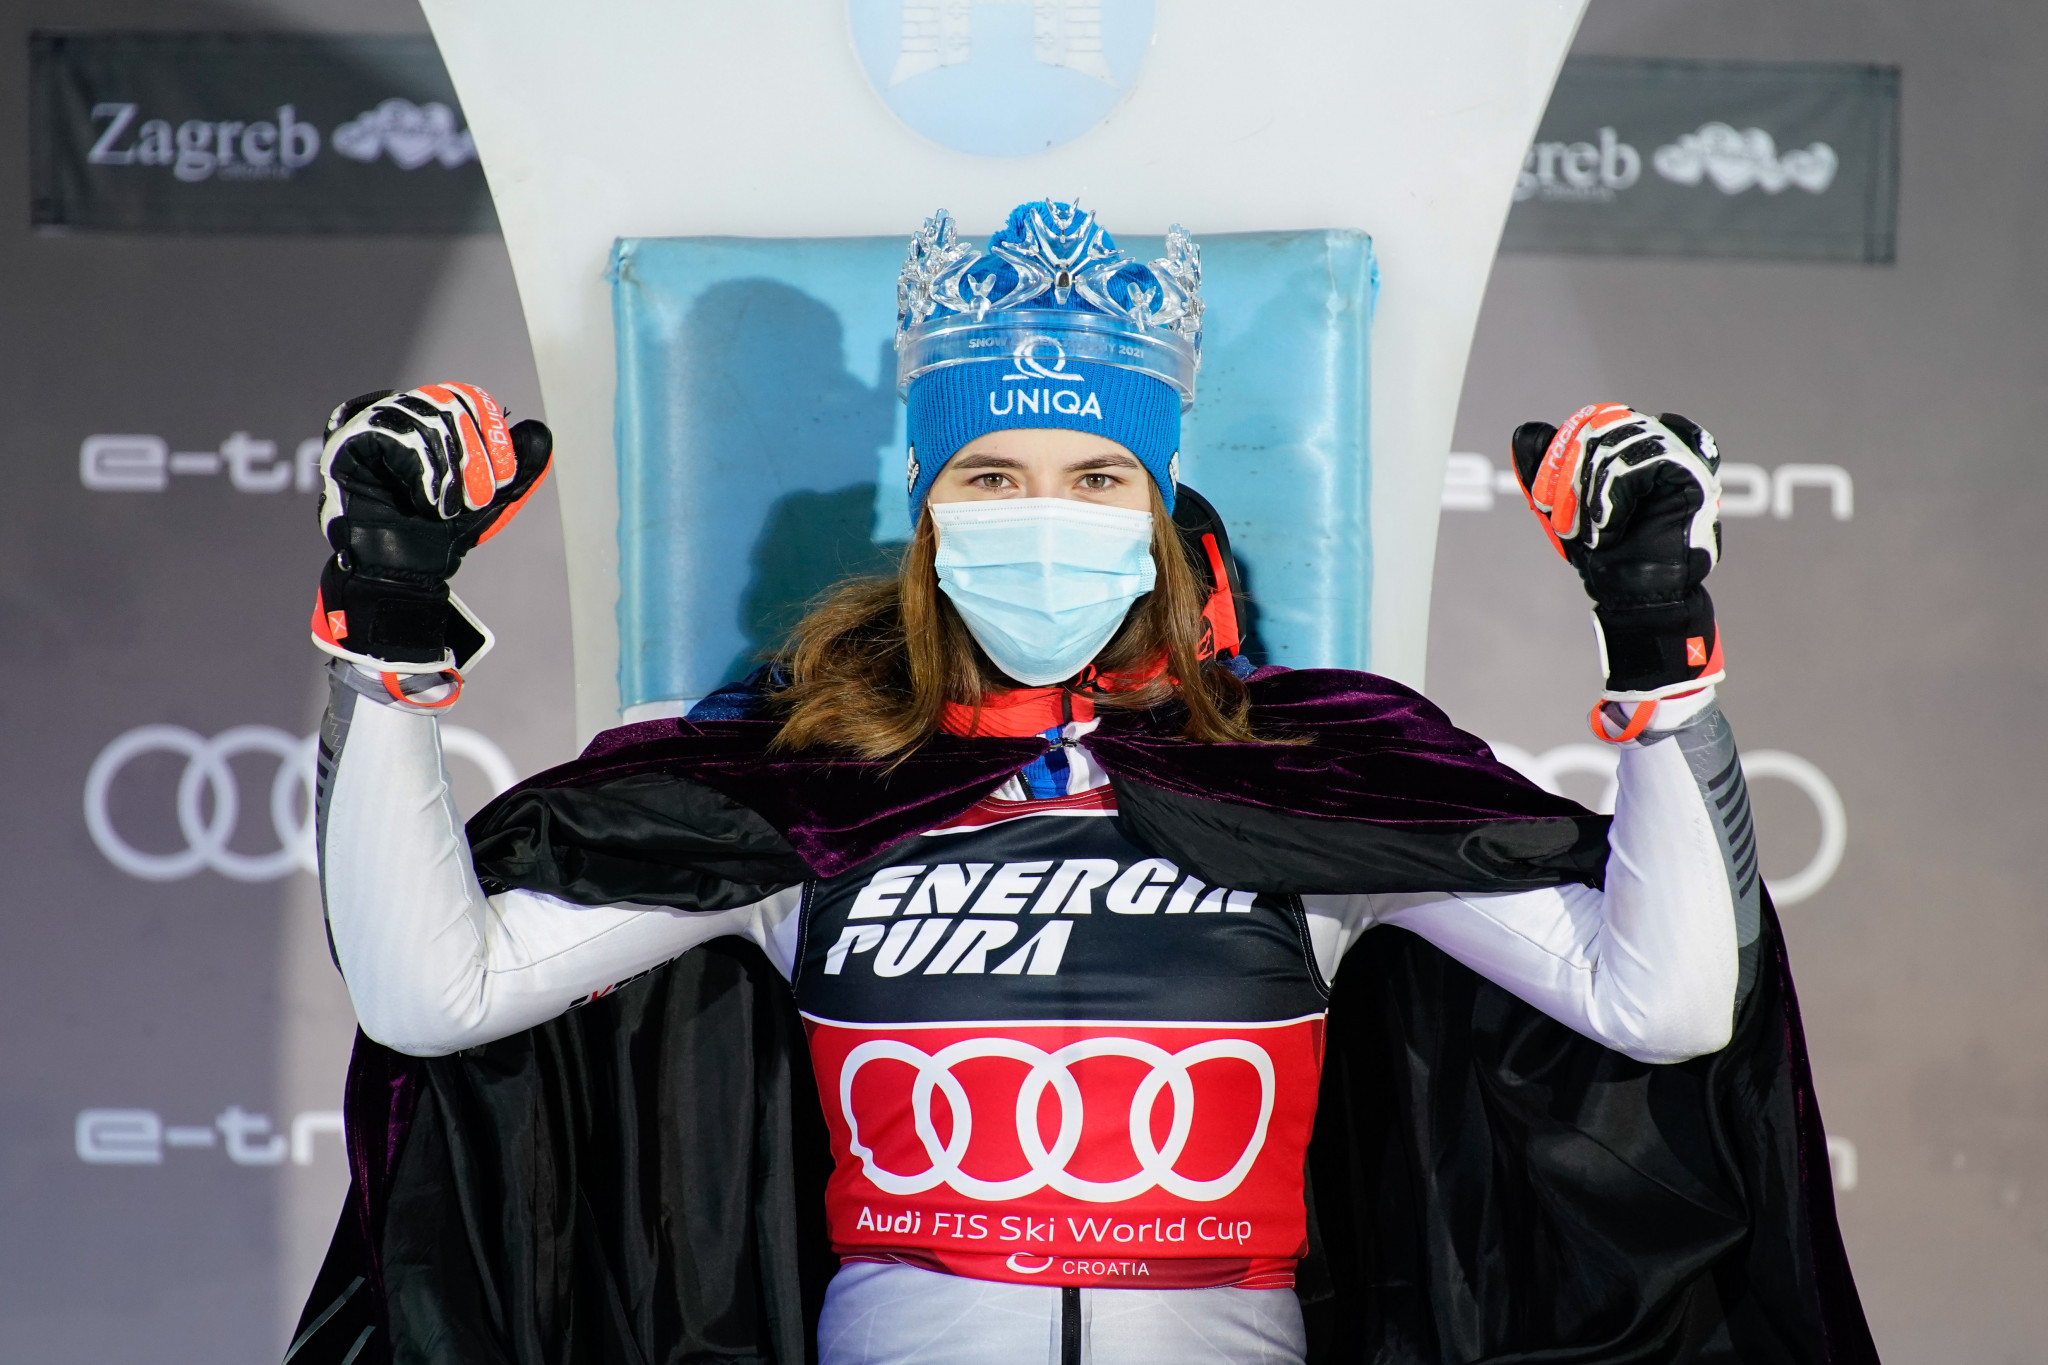 Petra Vlhová retained her Snow Queen title in Zagreb ©Getty Images